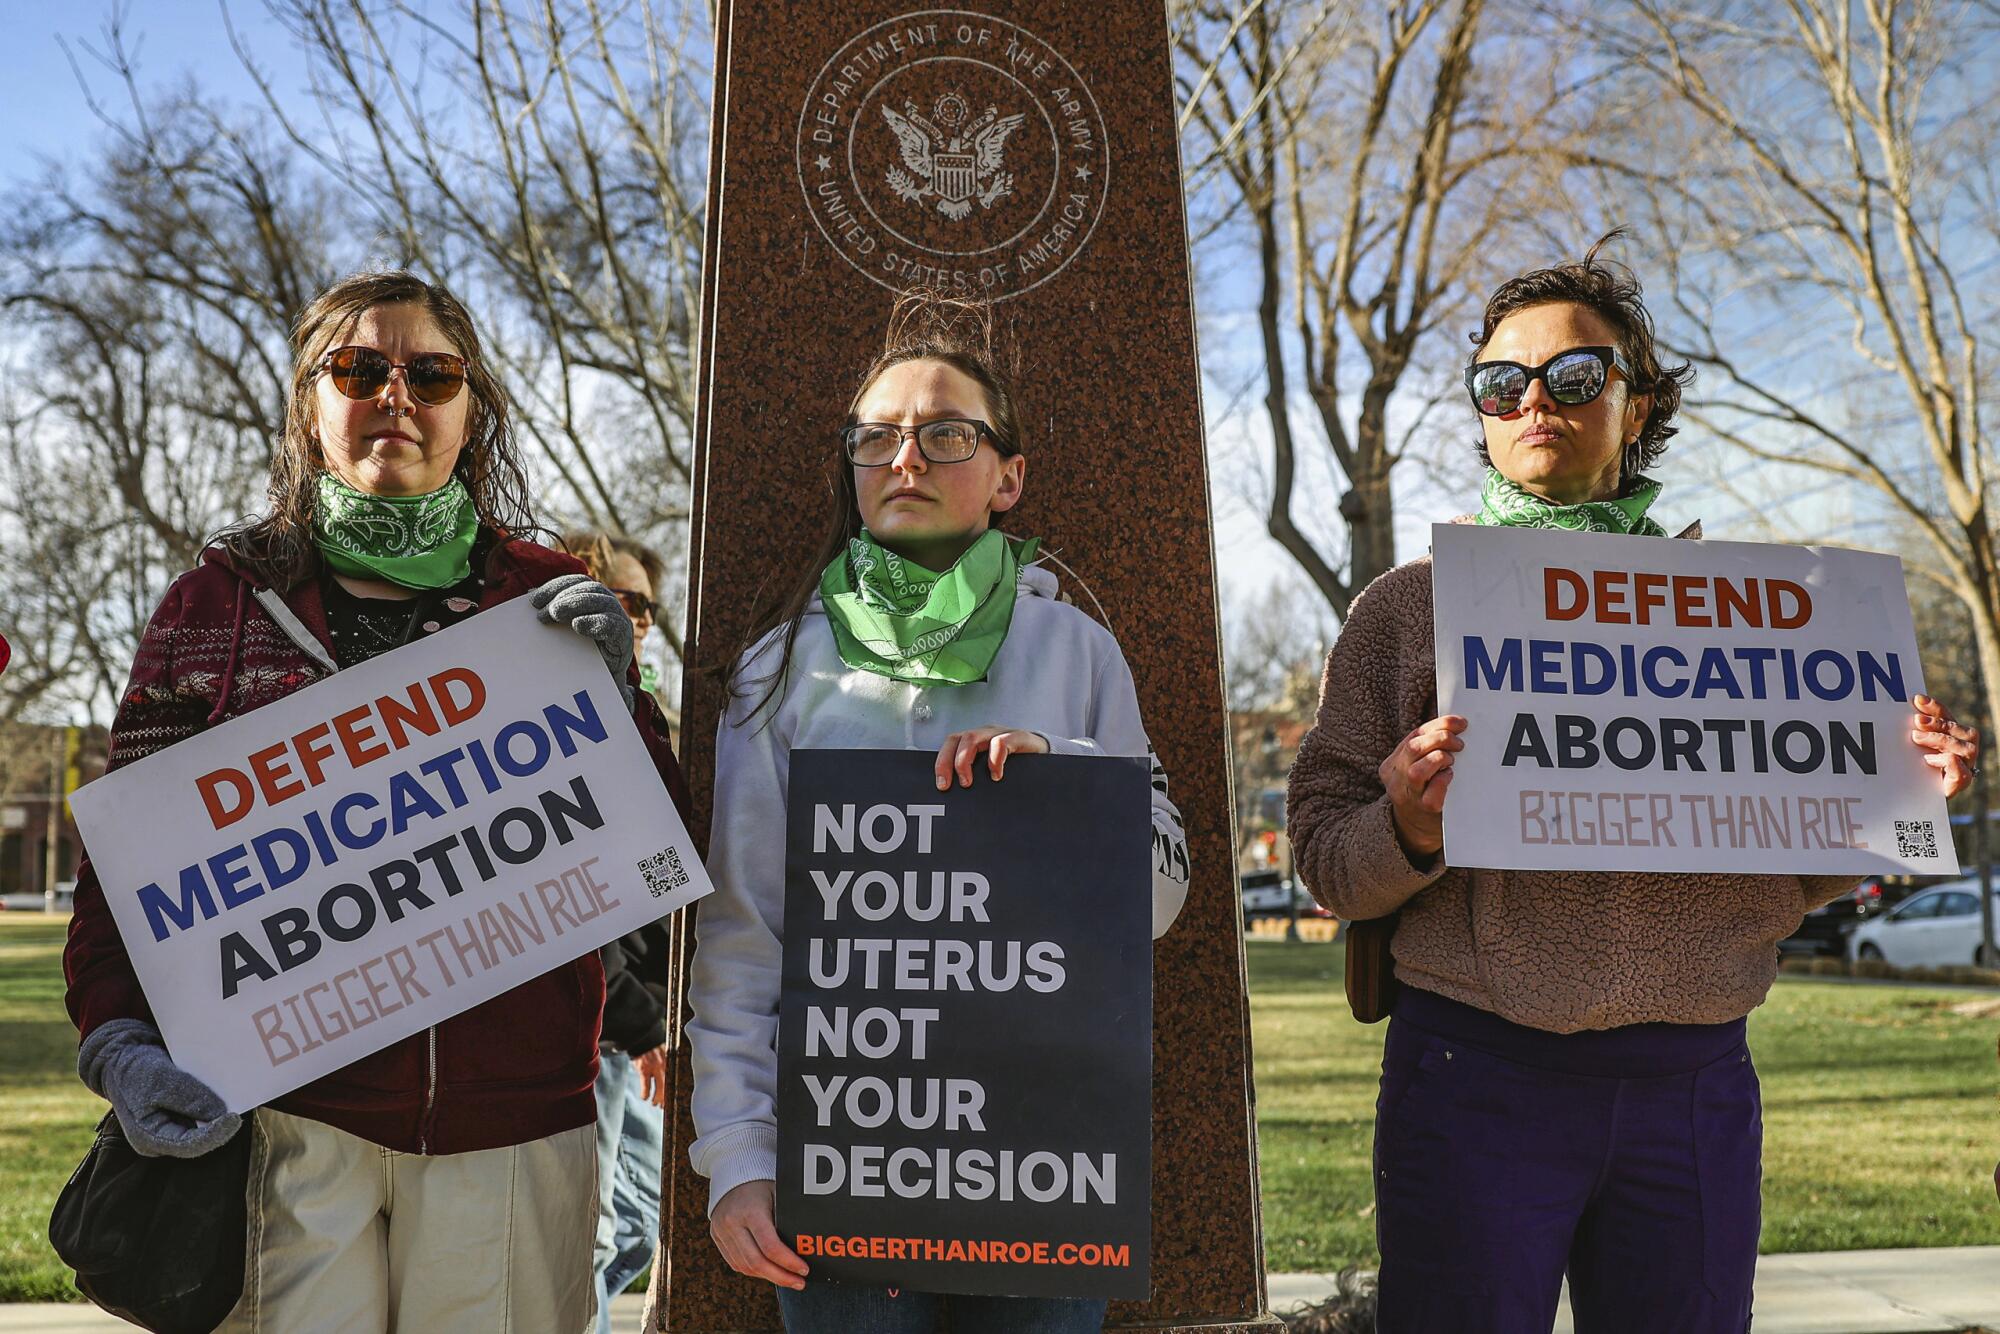 Demonstrators who support access to abortion medication hold signs outside a federal courthouse in Texas.